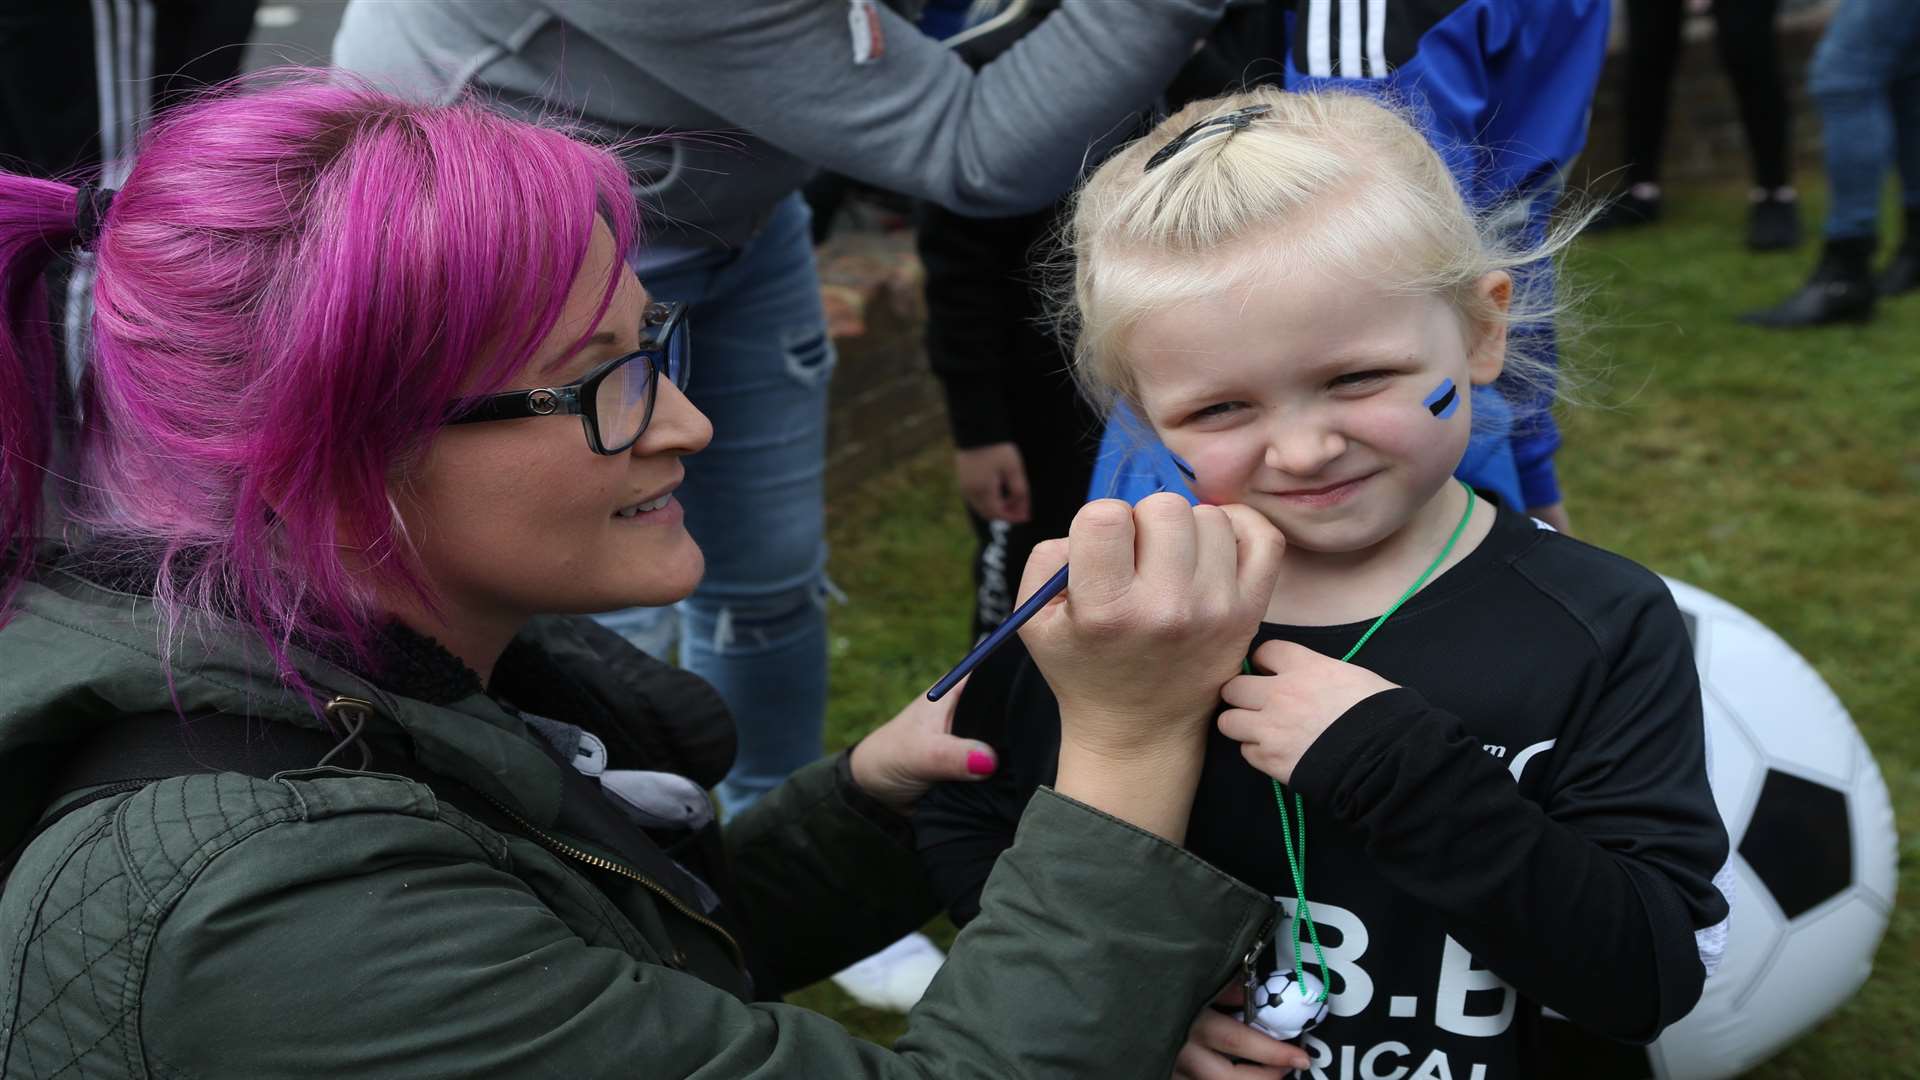 Becky Eyre paints her four-year-old daughter Matilda's face. Picture: John Westhrop